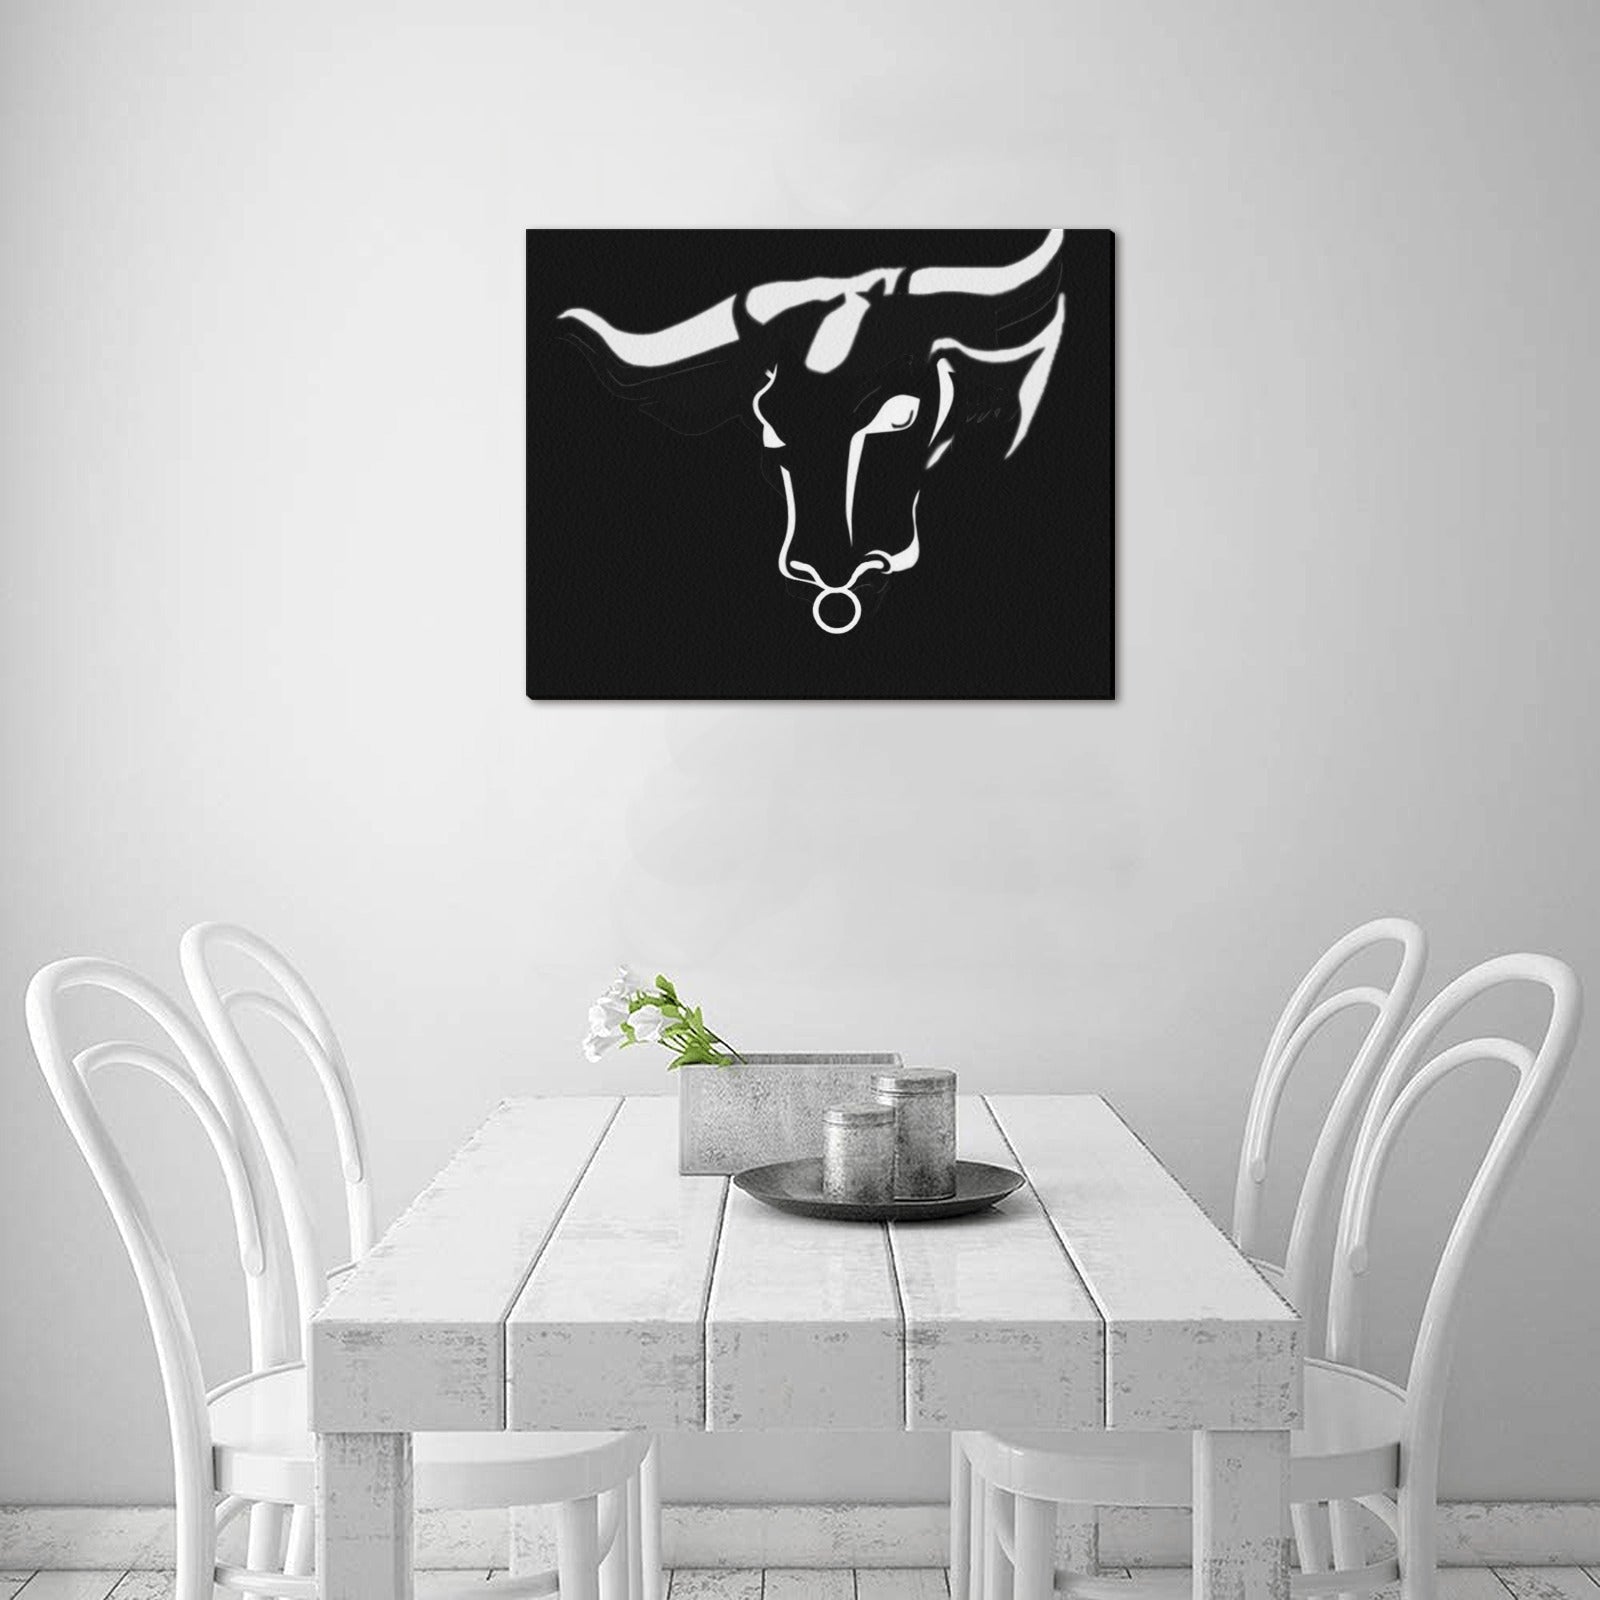 fz design collection one size / fz - raging bull framed canvas print 20"x16" (made in usa)